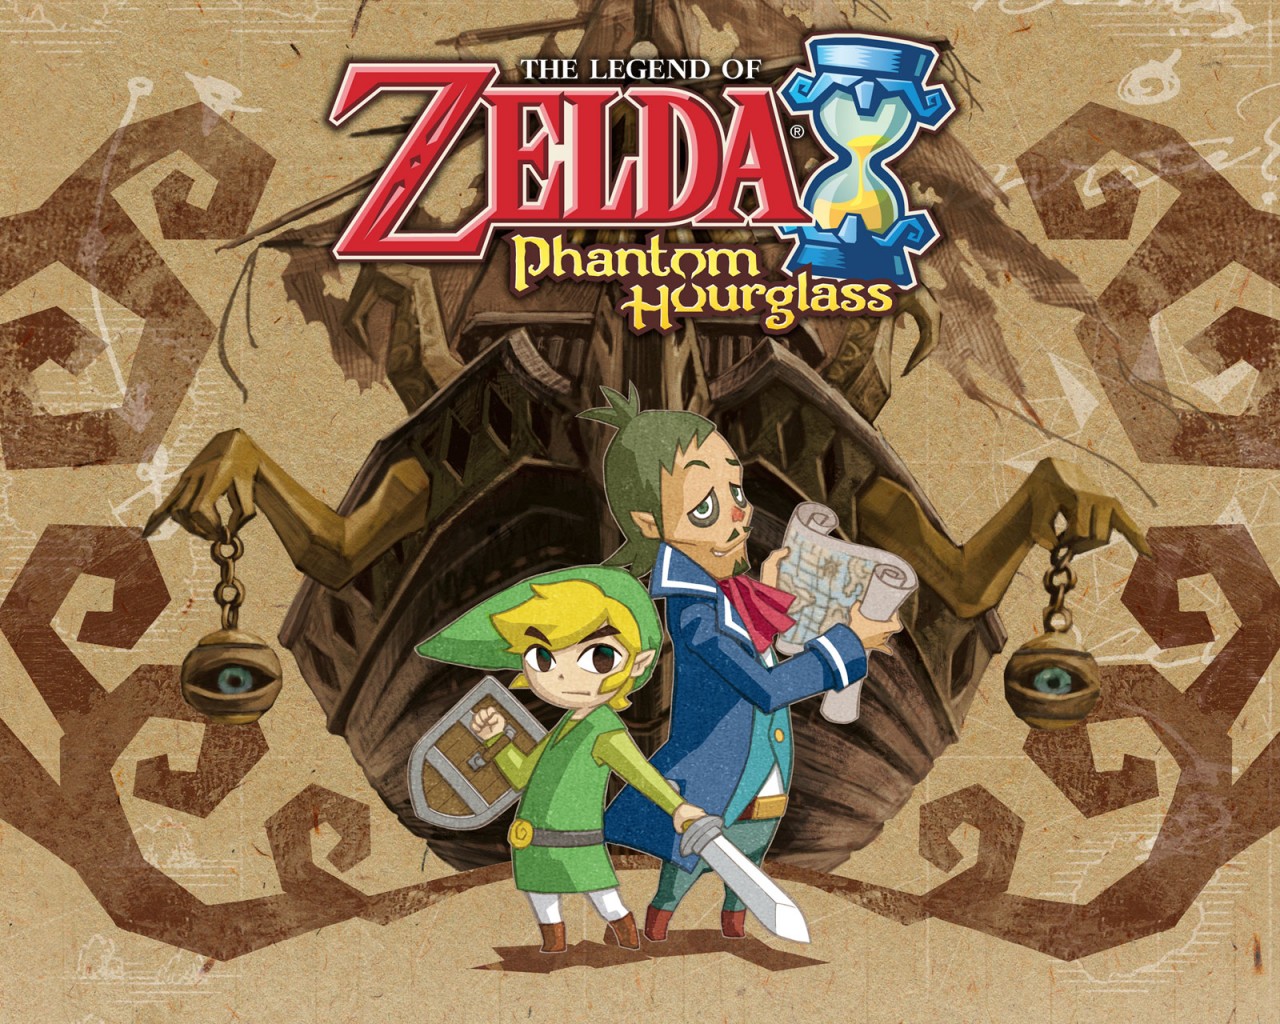 The Legend of Zelda: Phantom Hourglass is an action-adventure game developed and published by Nintendo for the Nintendo DS handheld game console.